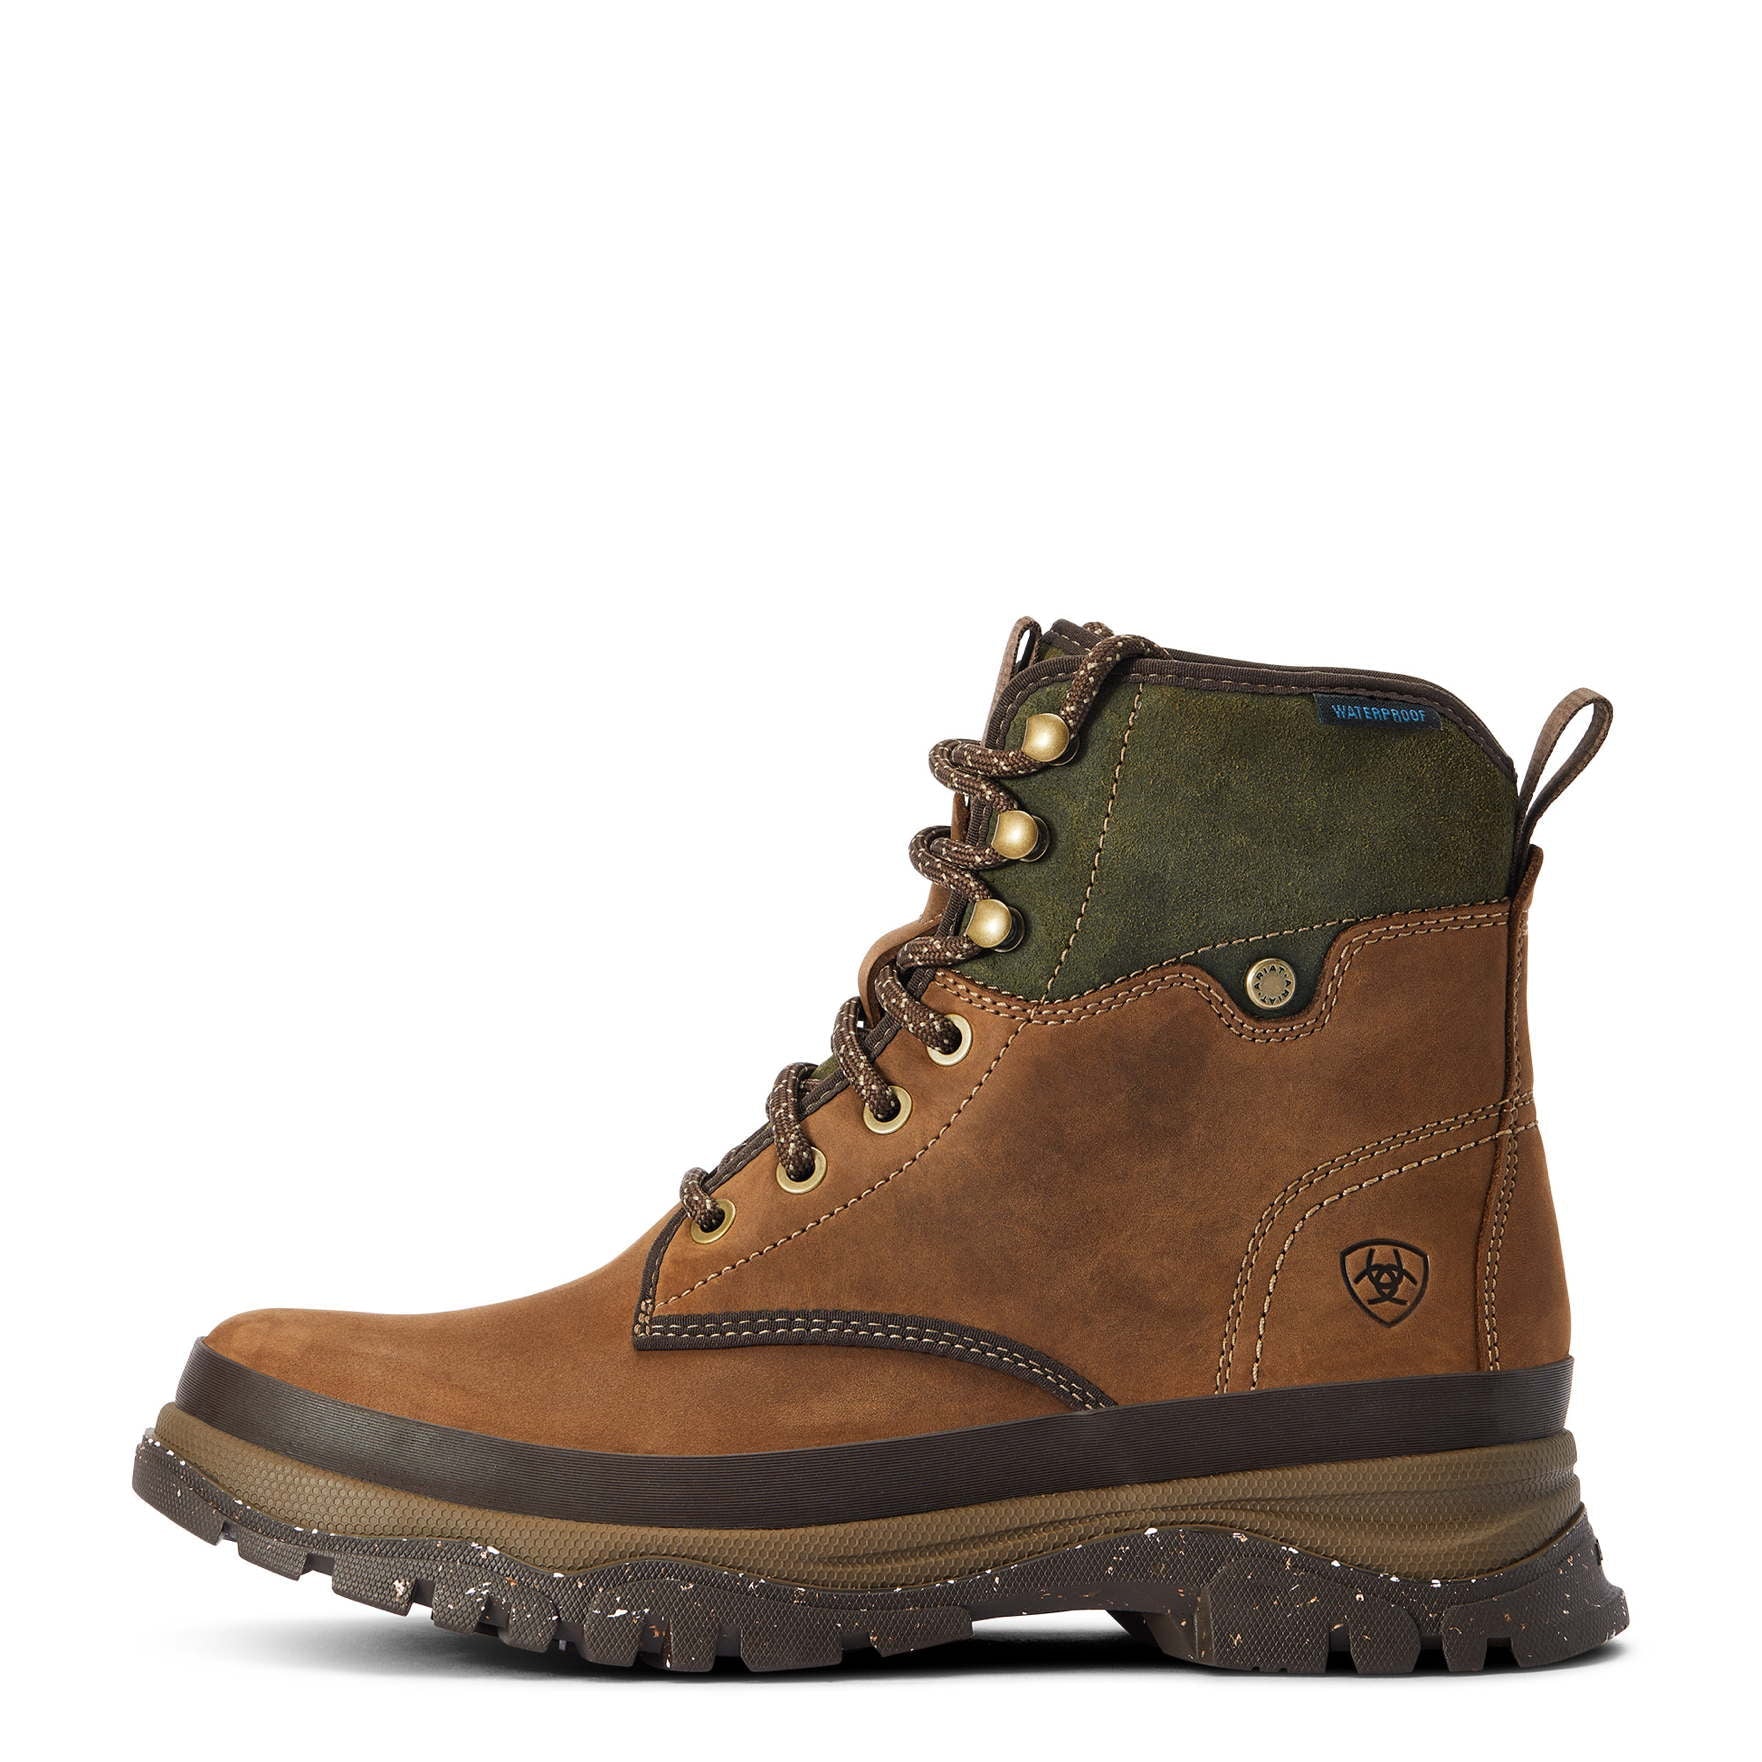 Boots WMS MORESBY WATERPROOF BOOT Oily Distressed Brown/Olive - Reitstiefel Kandel - Dein Reitshop